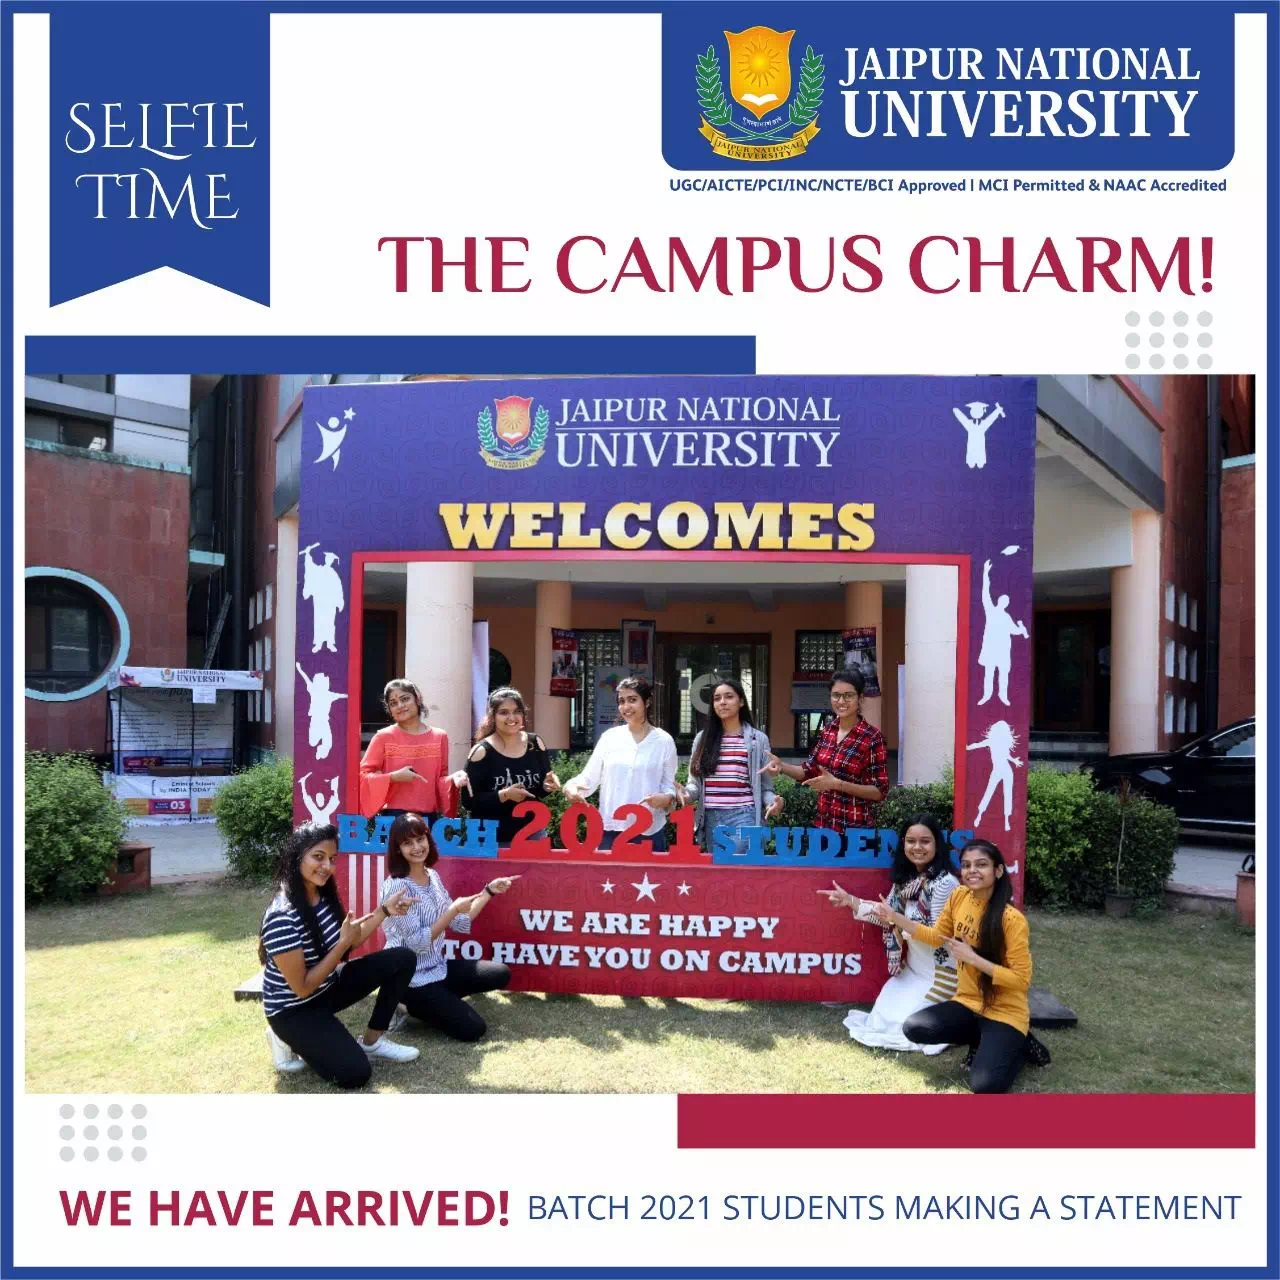 THE CAMPUS CHARM!